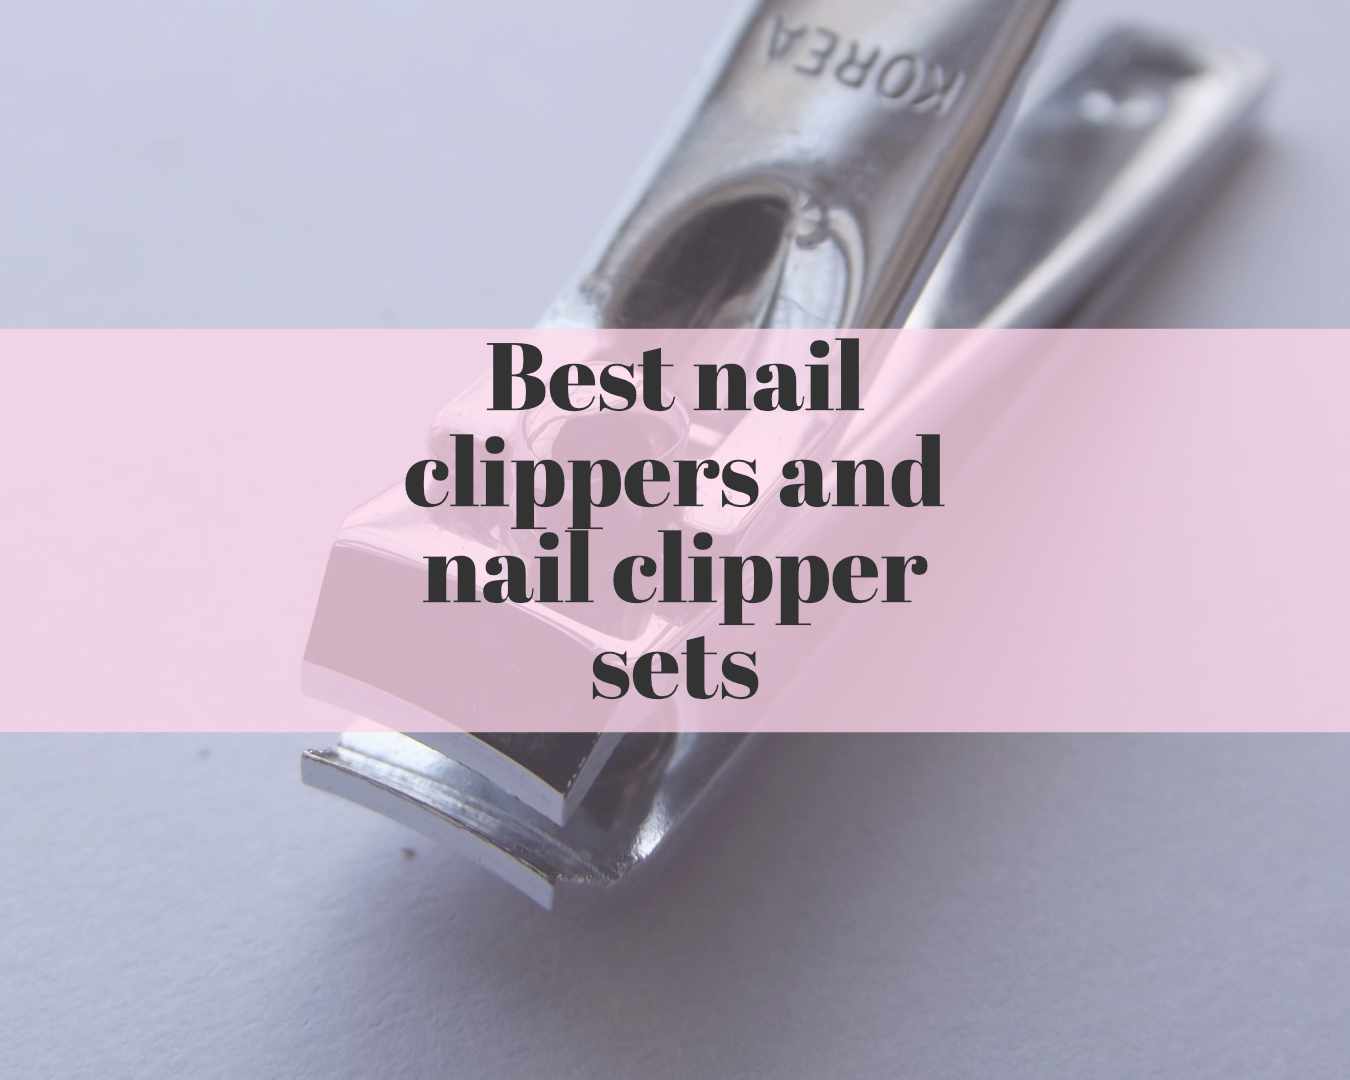 Best nail clippers and nail clipper sets